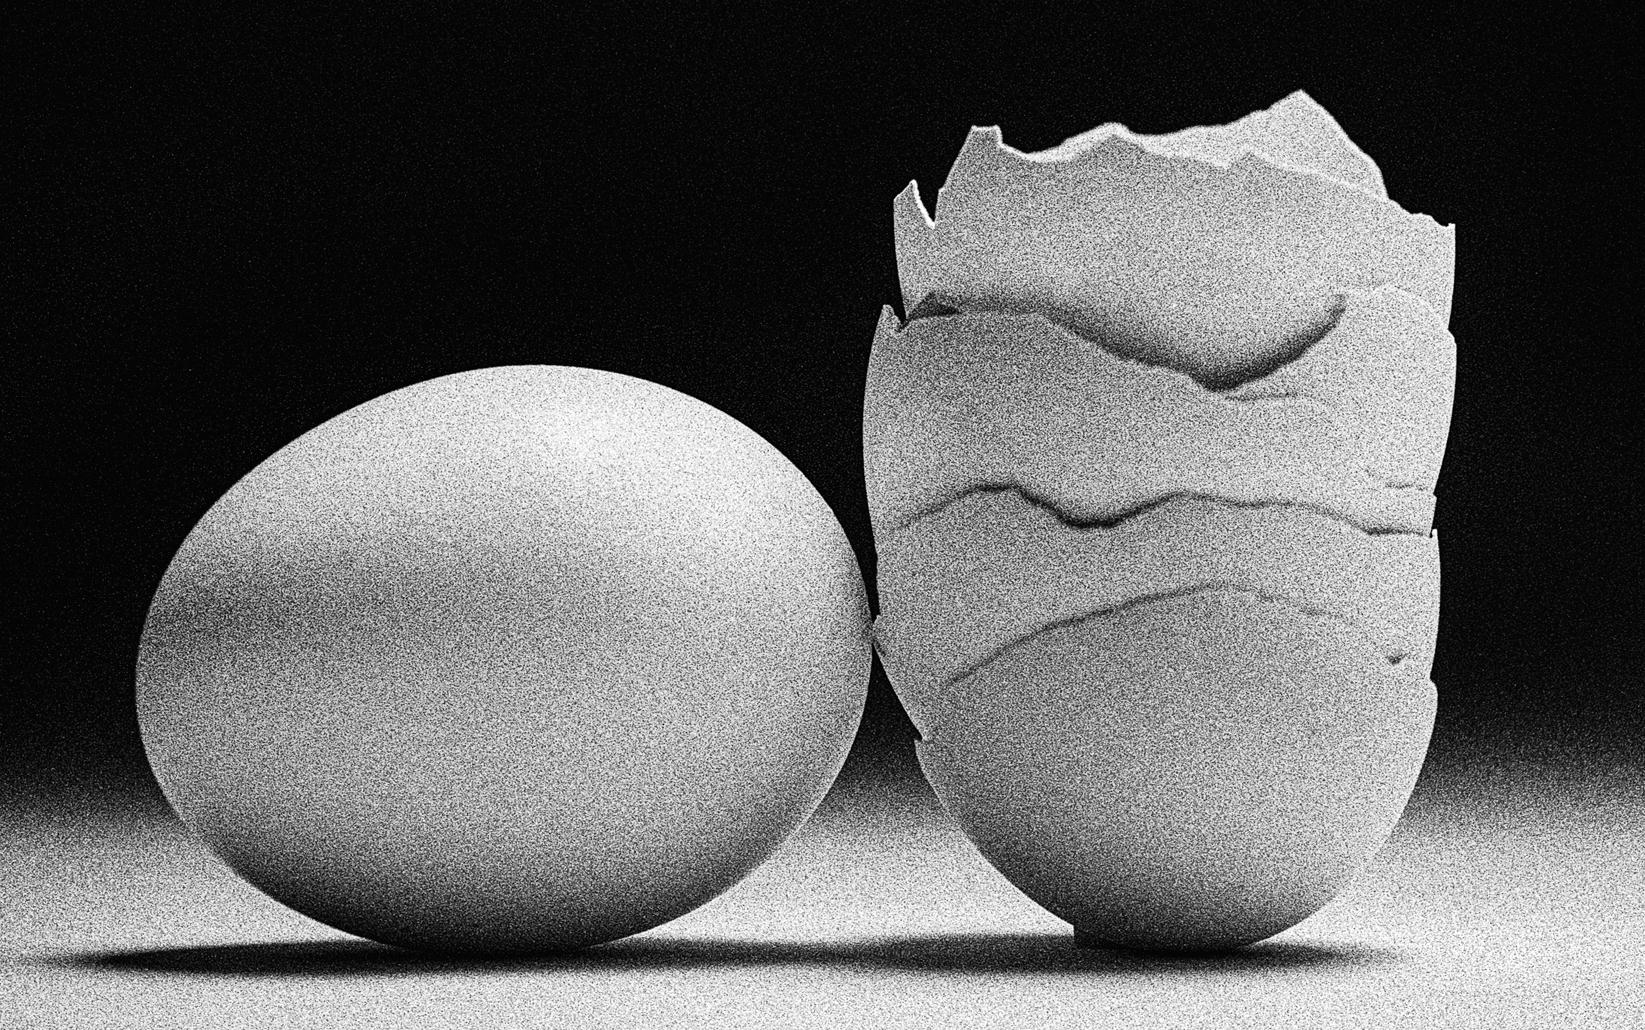 Egg Study 18. Still Life . Black and White Silver Gelatin Print - Photograph by Shine Huang